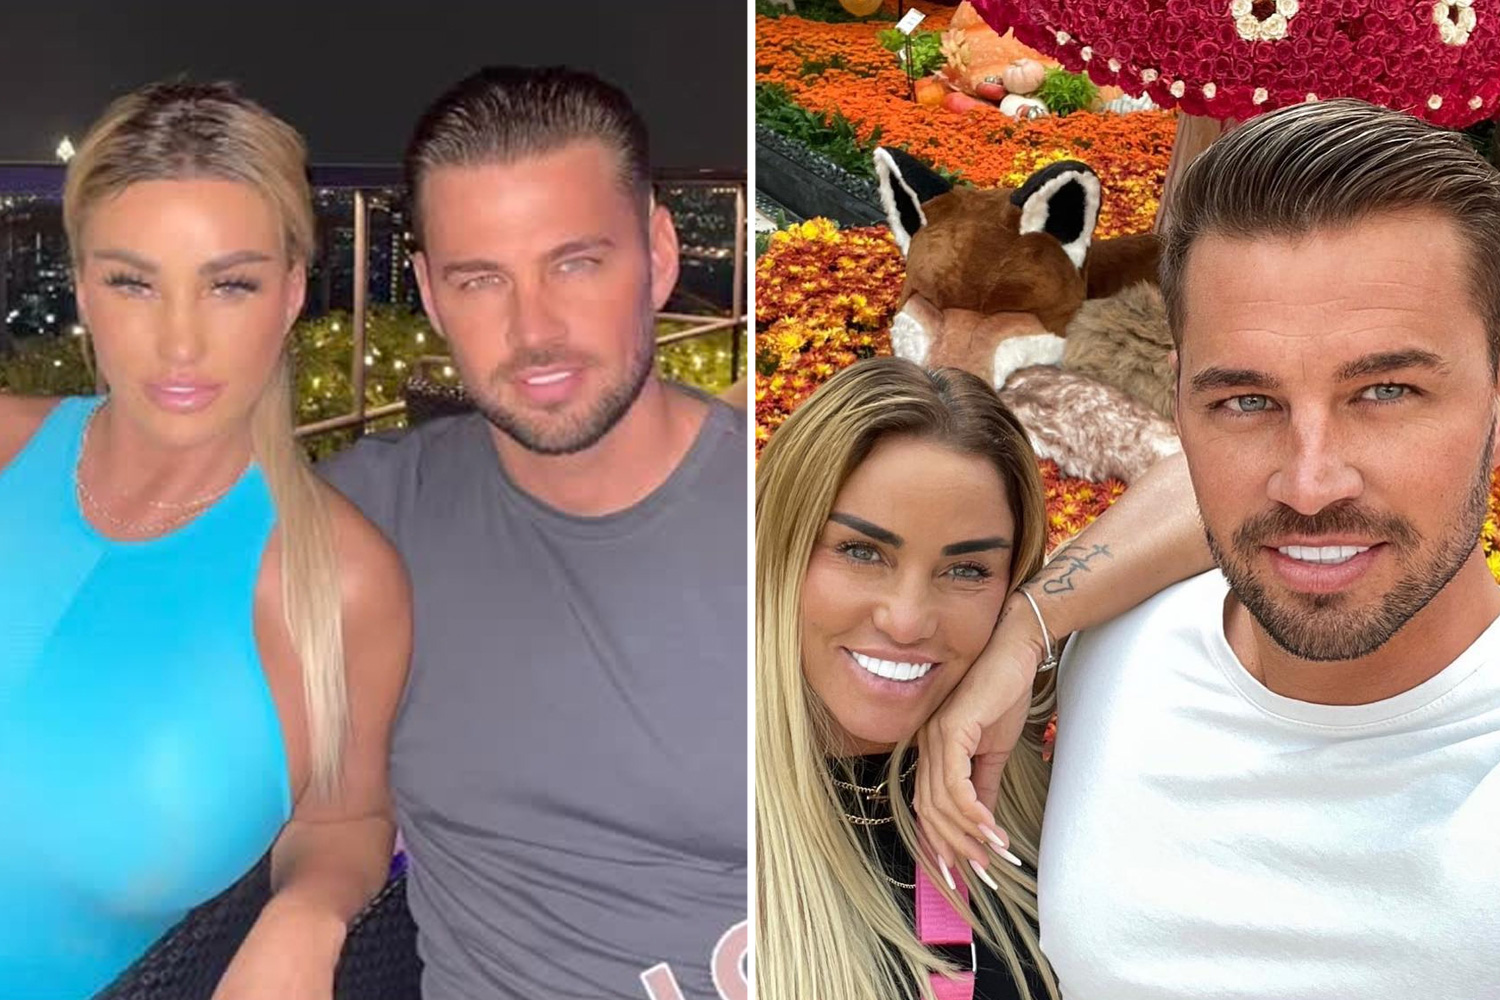 Katie Price dumped by fiancé Carl after he accused her 'of cheating'